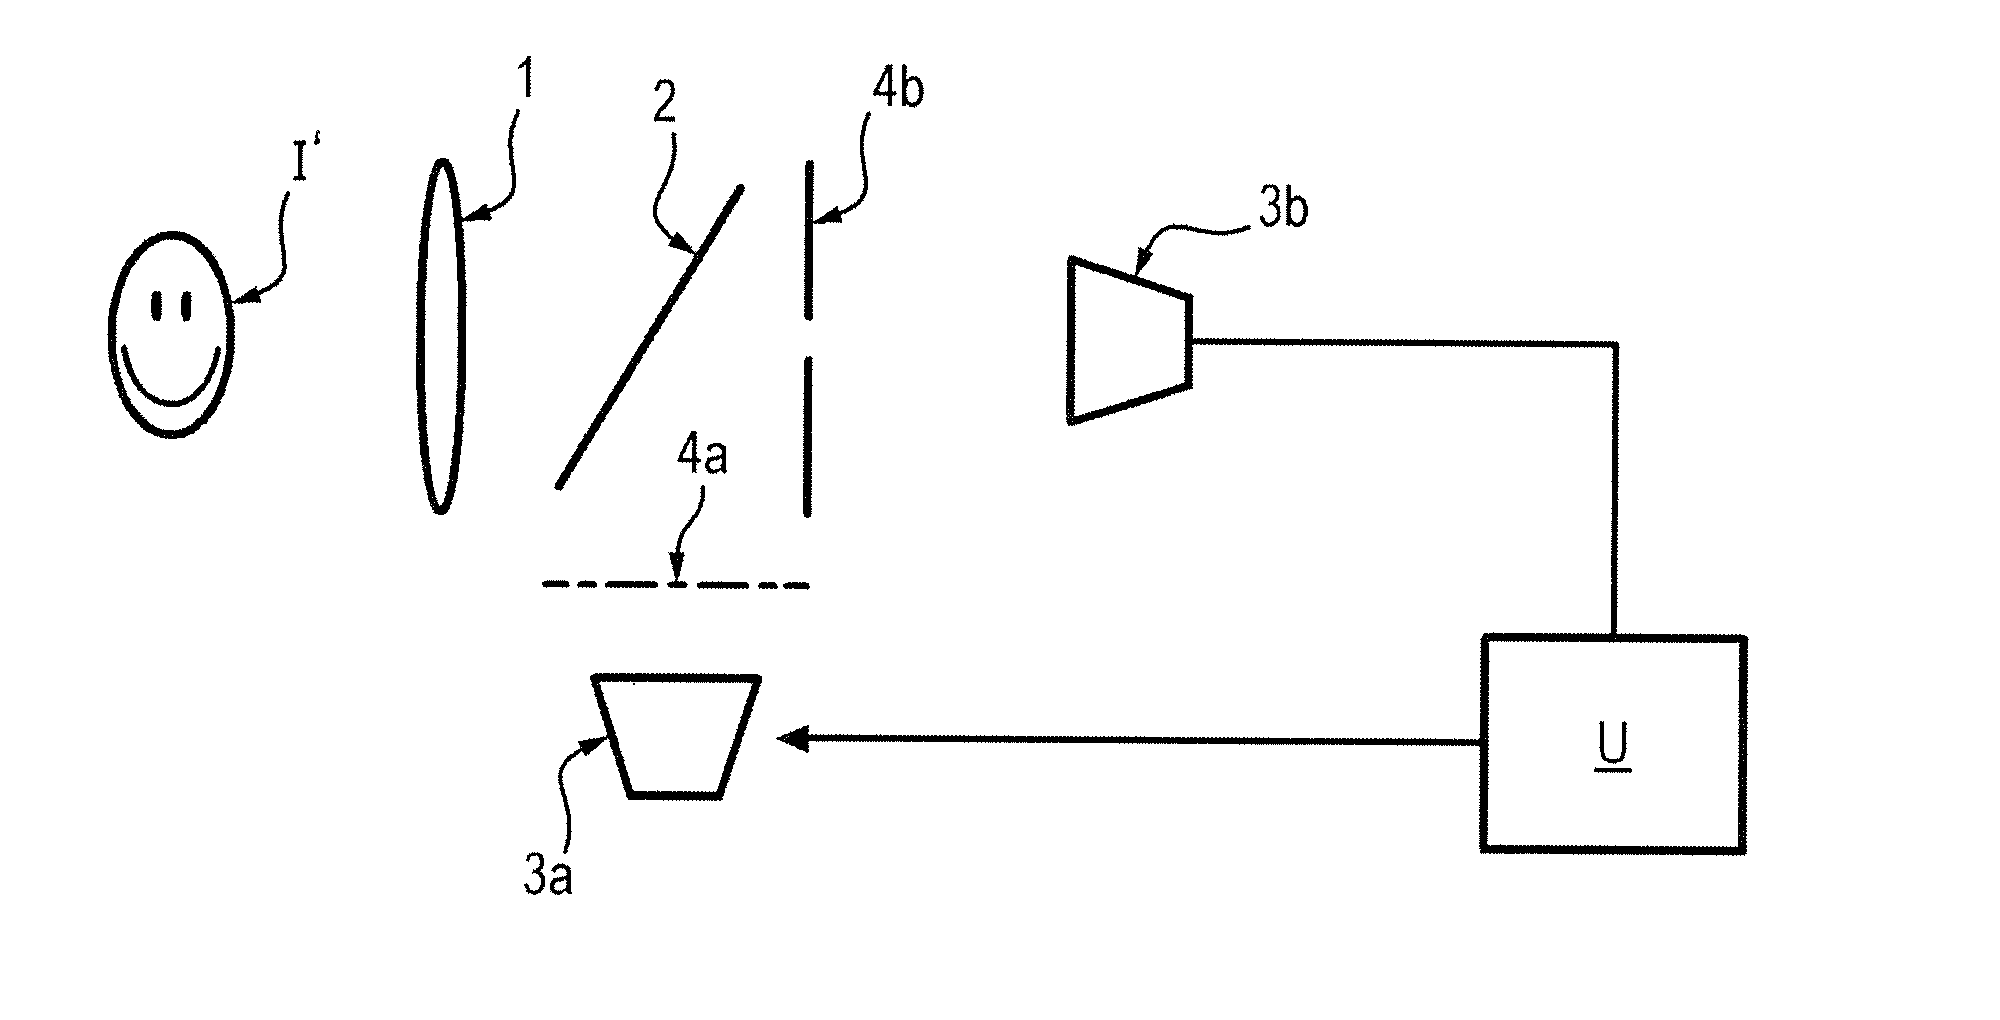 Optical acquisition device for biometric systems